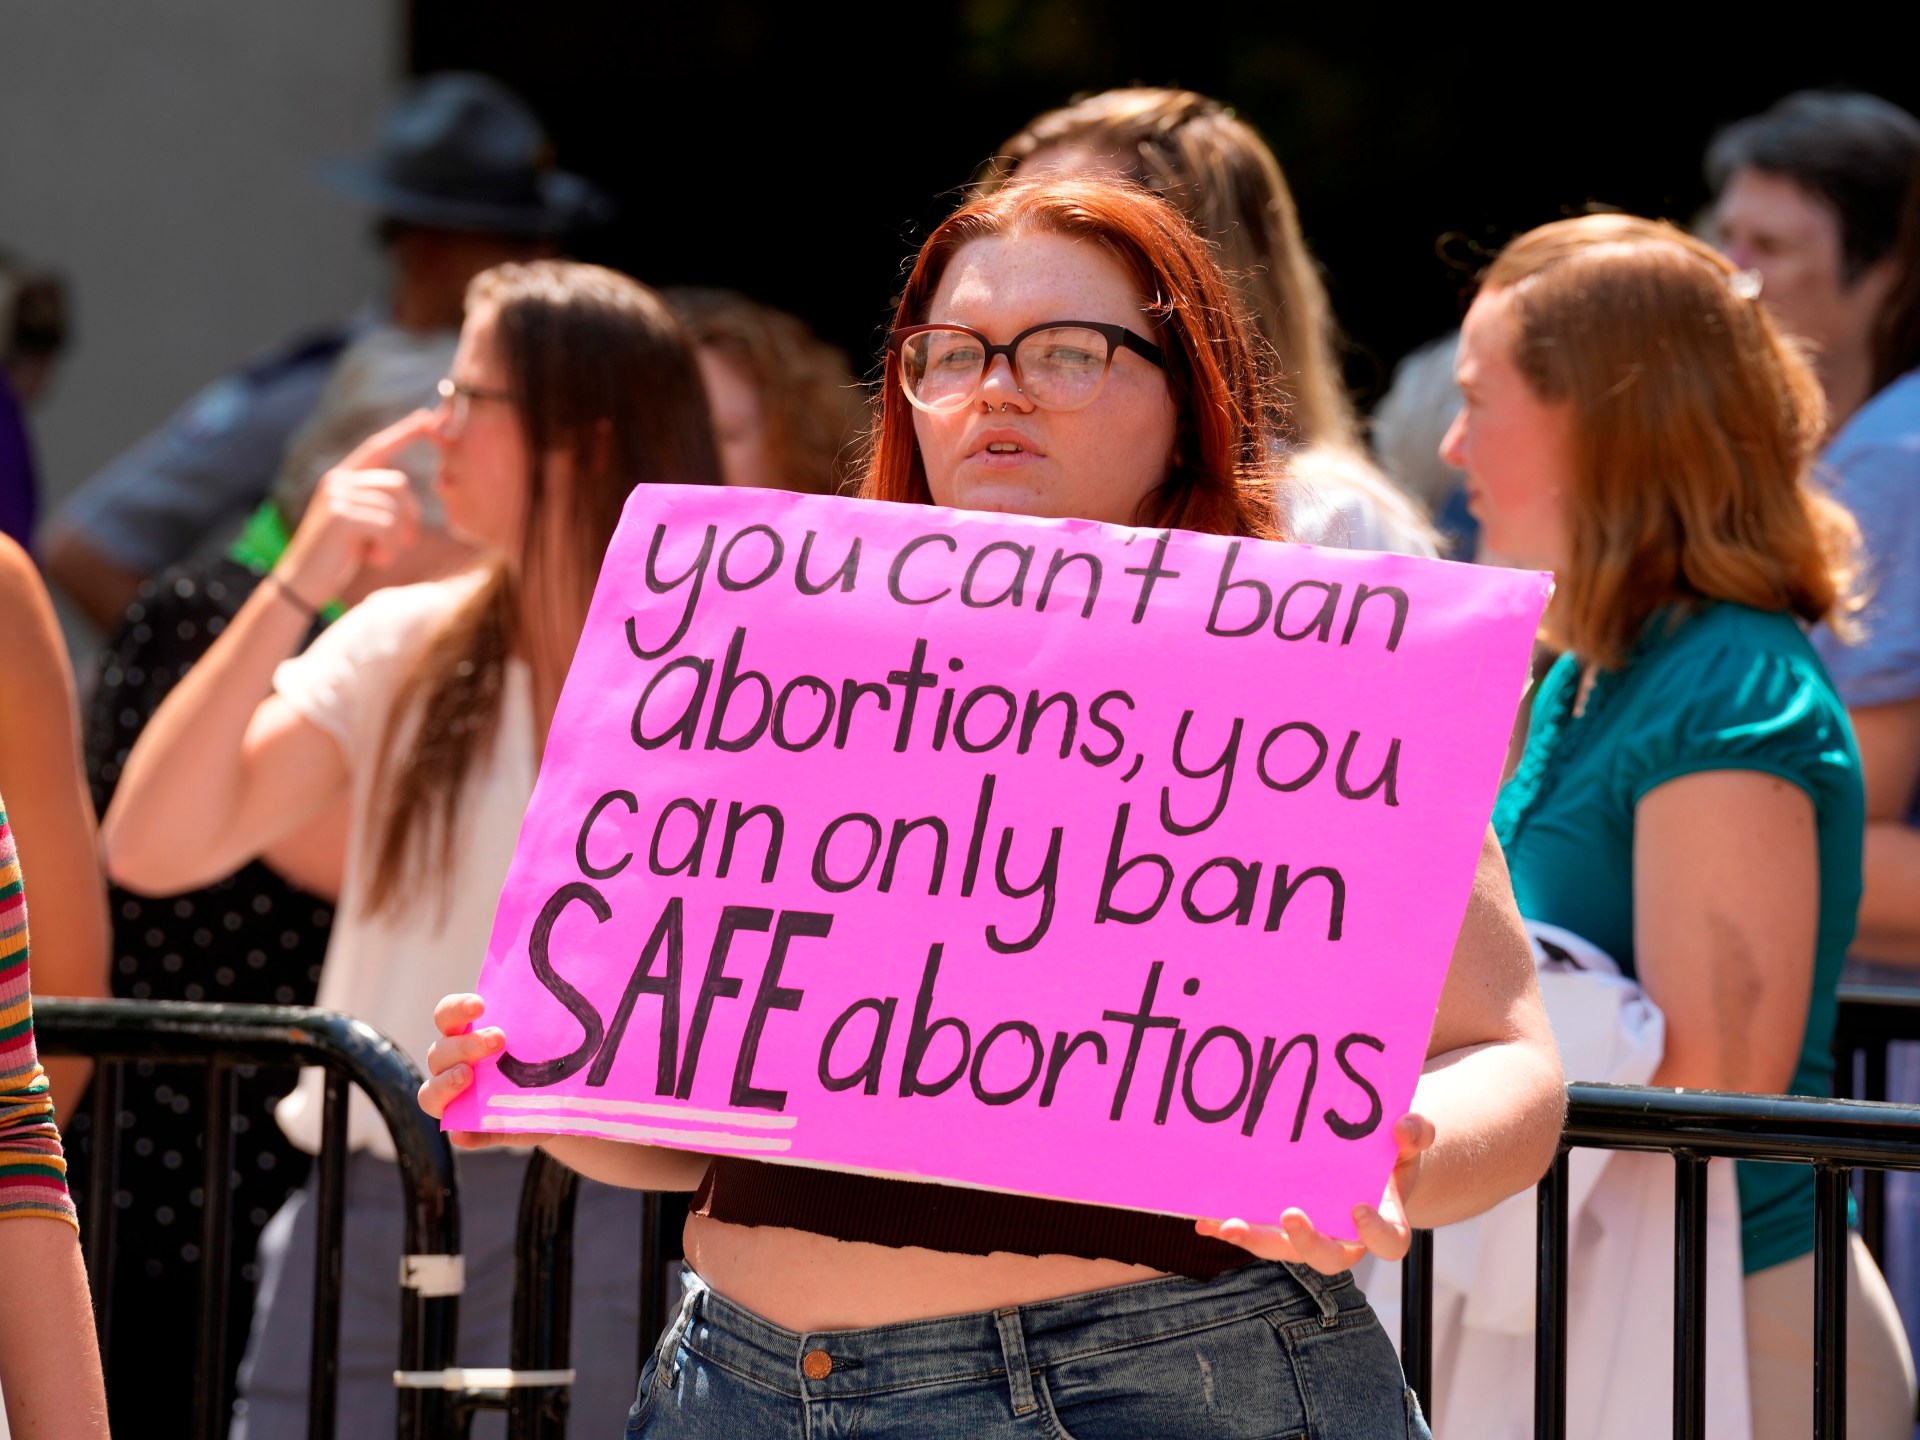 US Supreme Court to decide on access to abortion pill in major case | Women’s Rights News